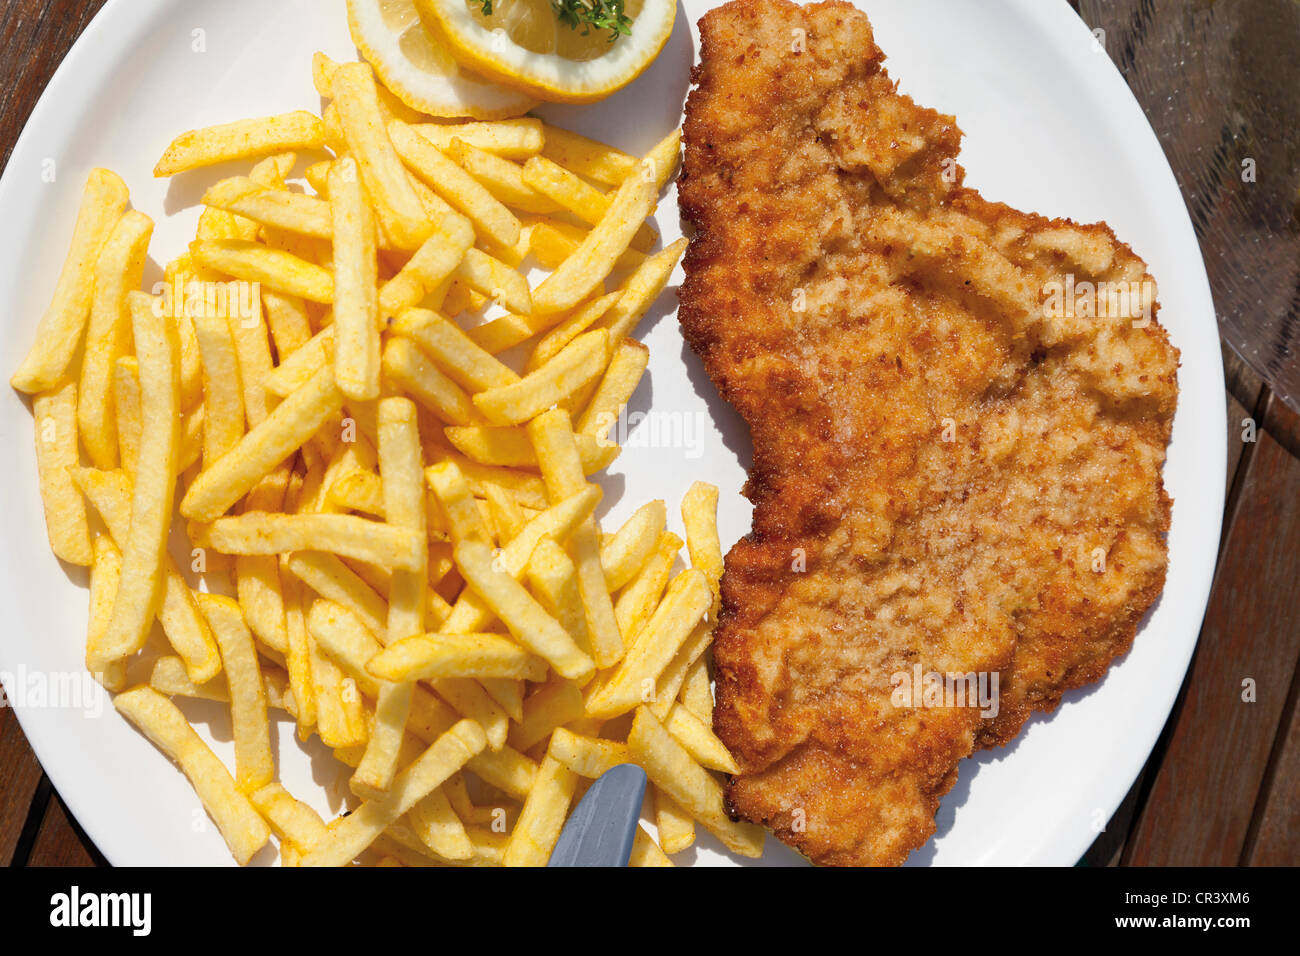 Wiener Schnitzel with French fries Stock Photo